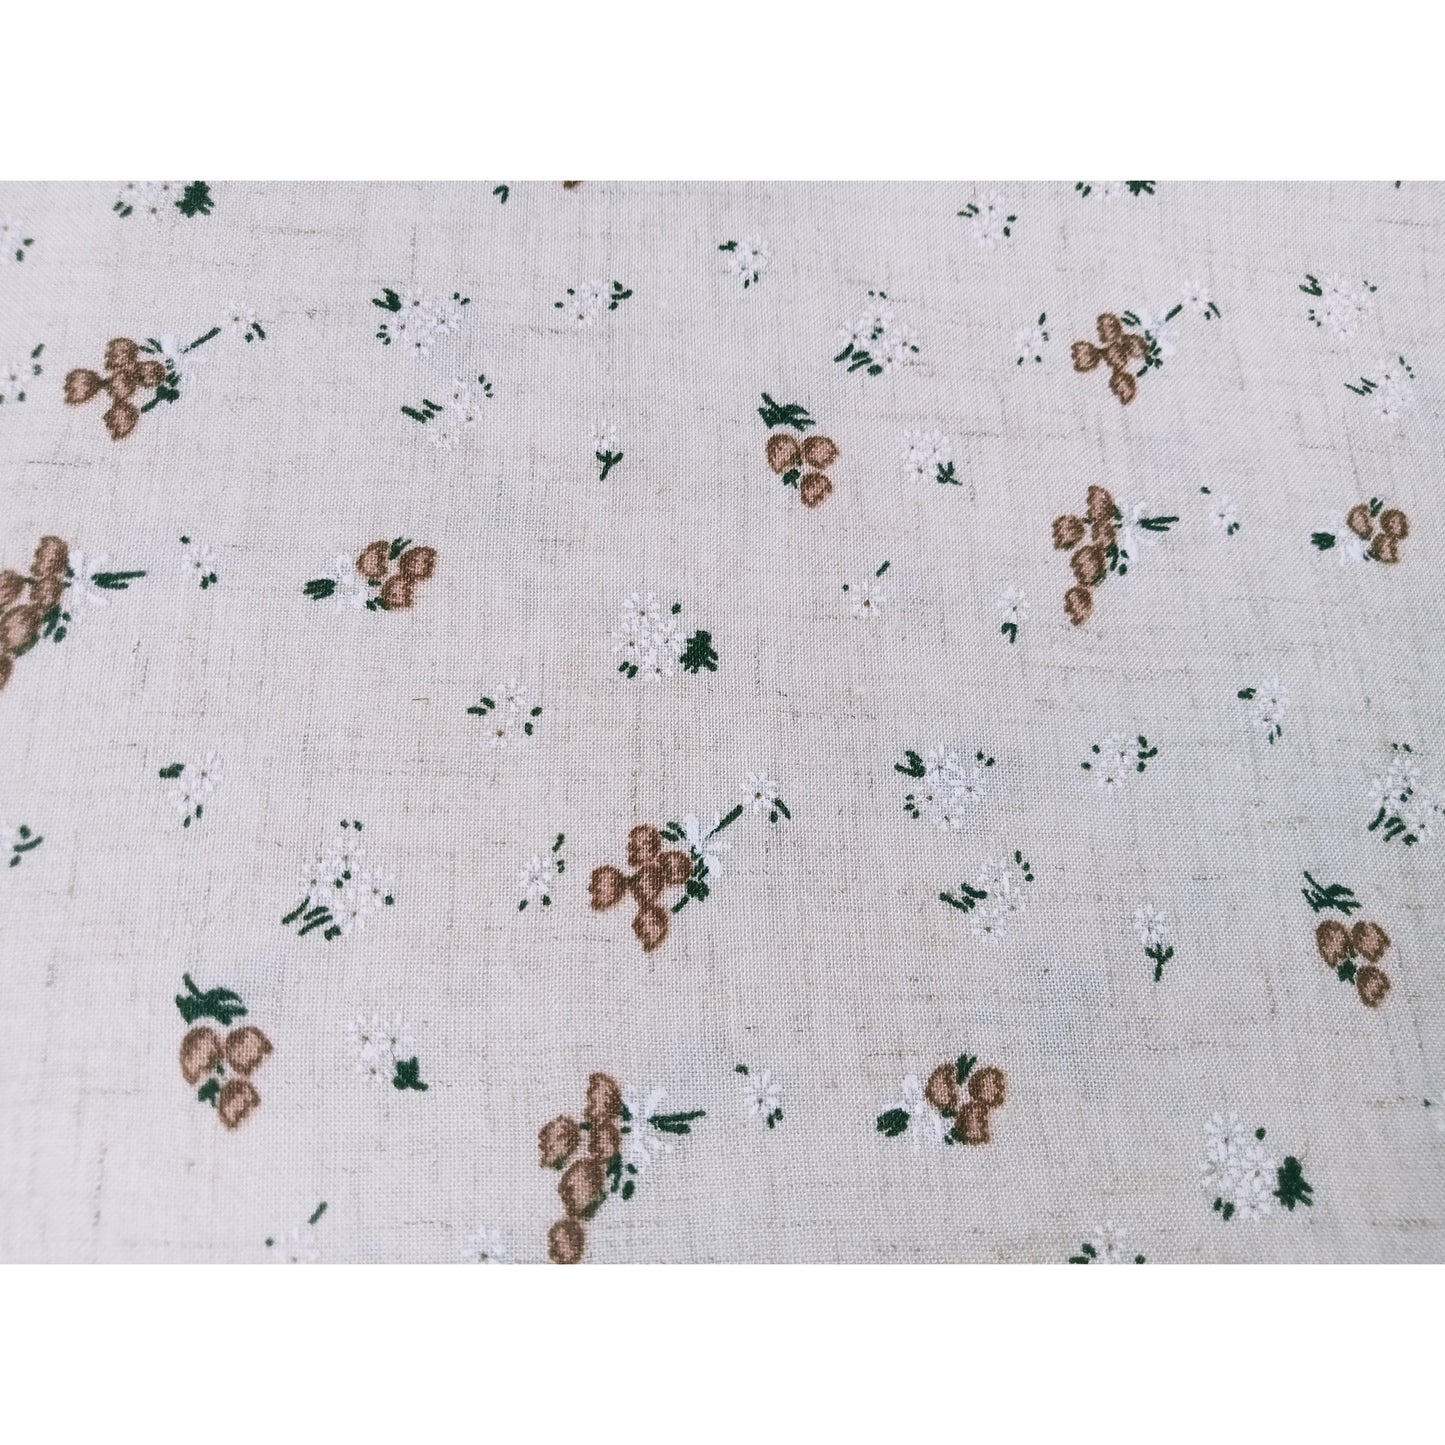 Daisy - Floral printed woven linen fabric